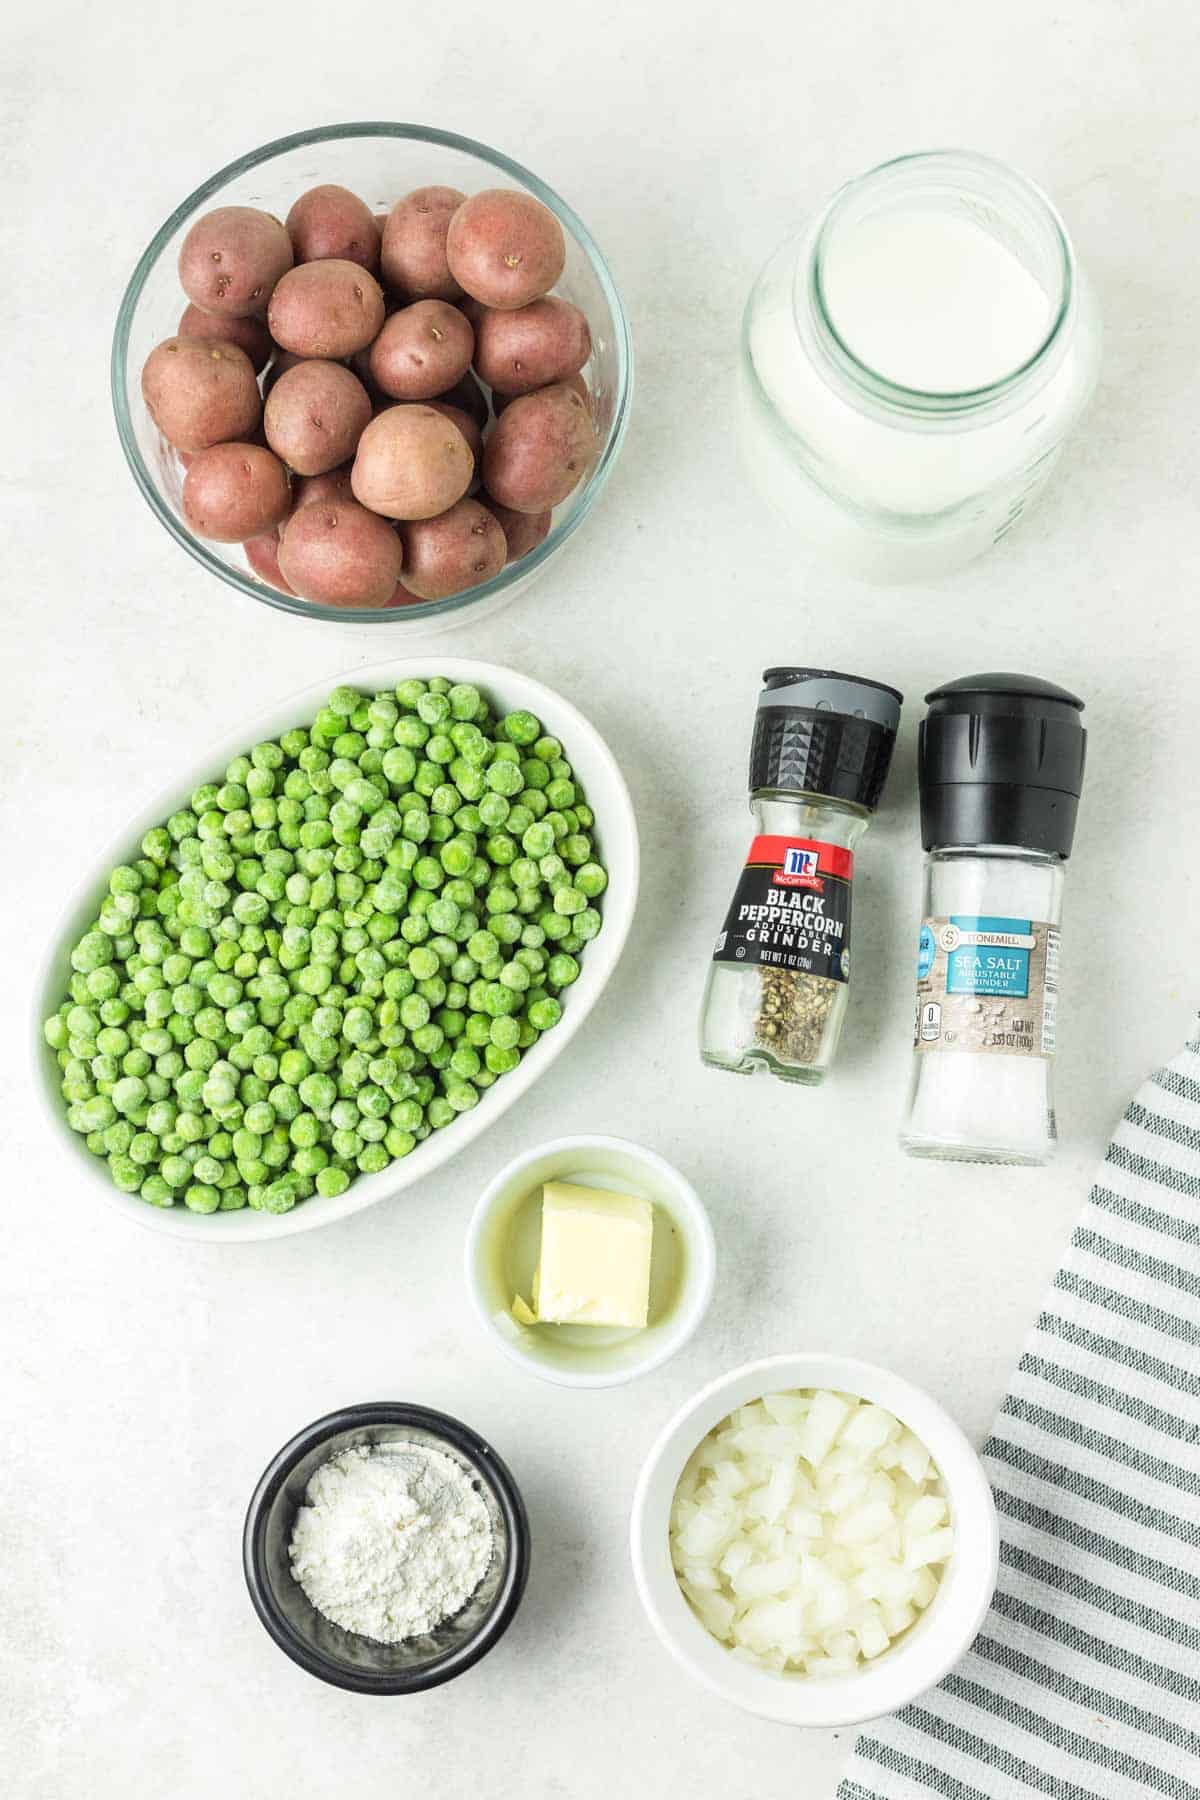 Creamed peas and potatoes ingredients on a marble surface.